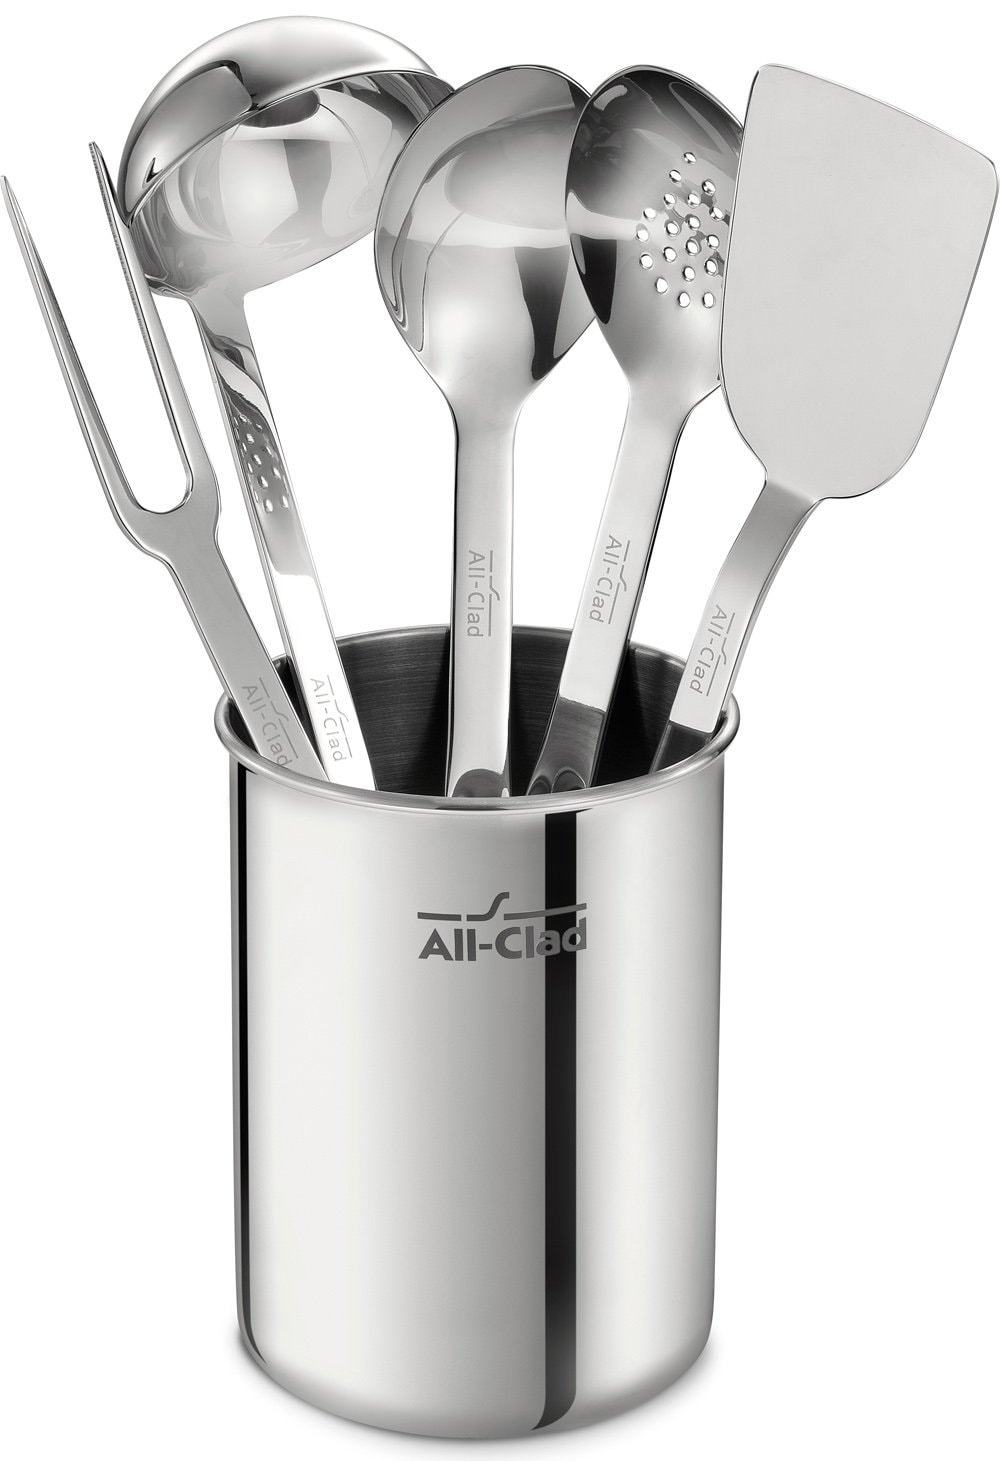 Buy now all clad tset1 stainless steel kitchen tool set caddy included 6 piece silver